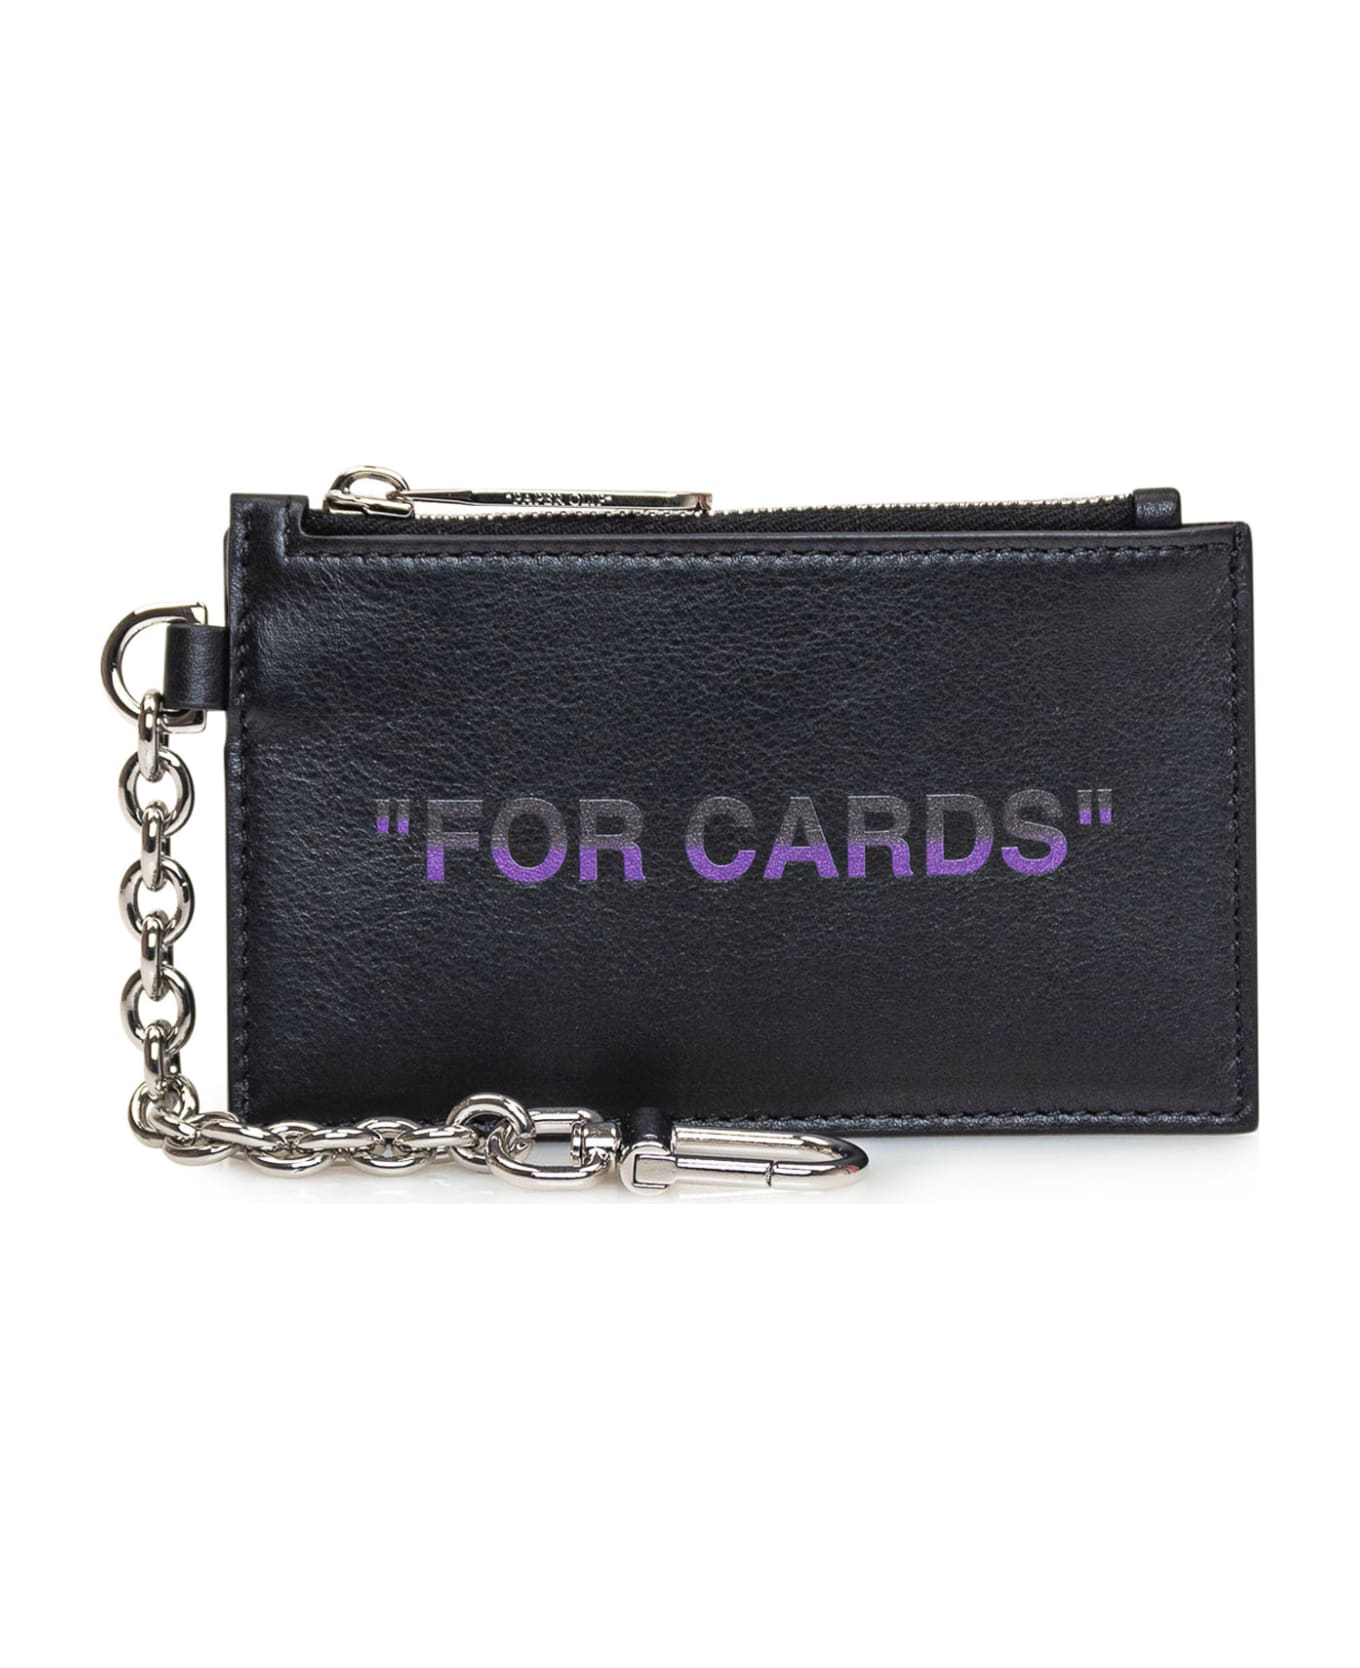 Off-White Card Holder With Chain - Black 財布